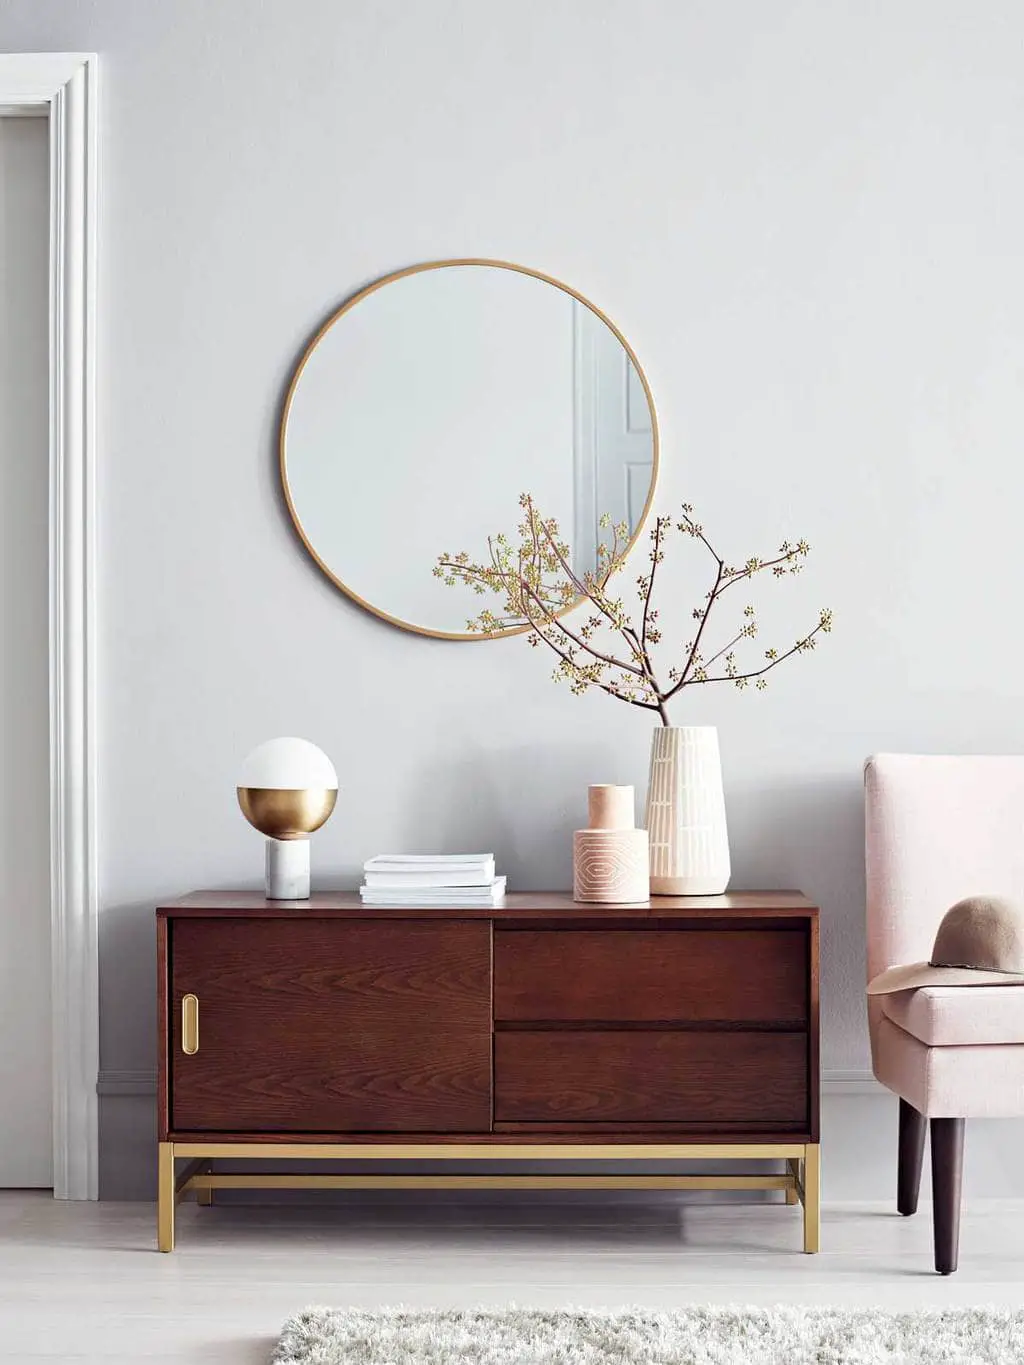 Modern sideboard and round mirror with blush slipper chair from Project 62 on Thou Swell @thouswellblog